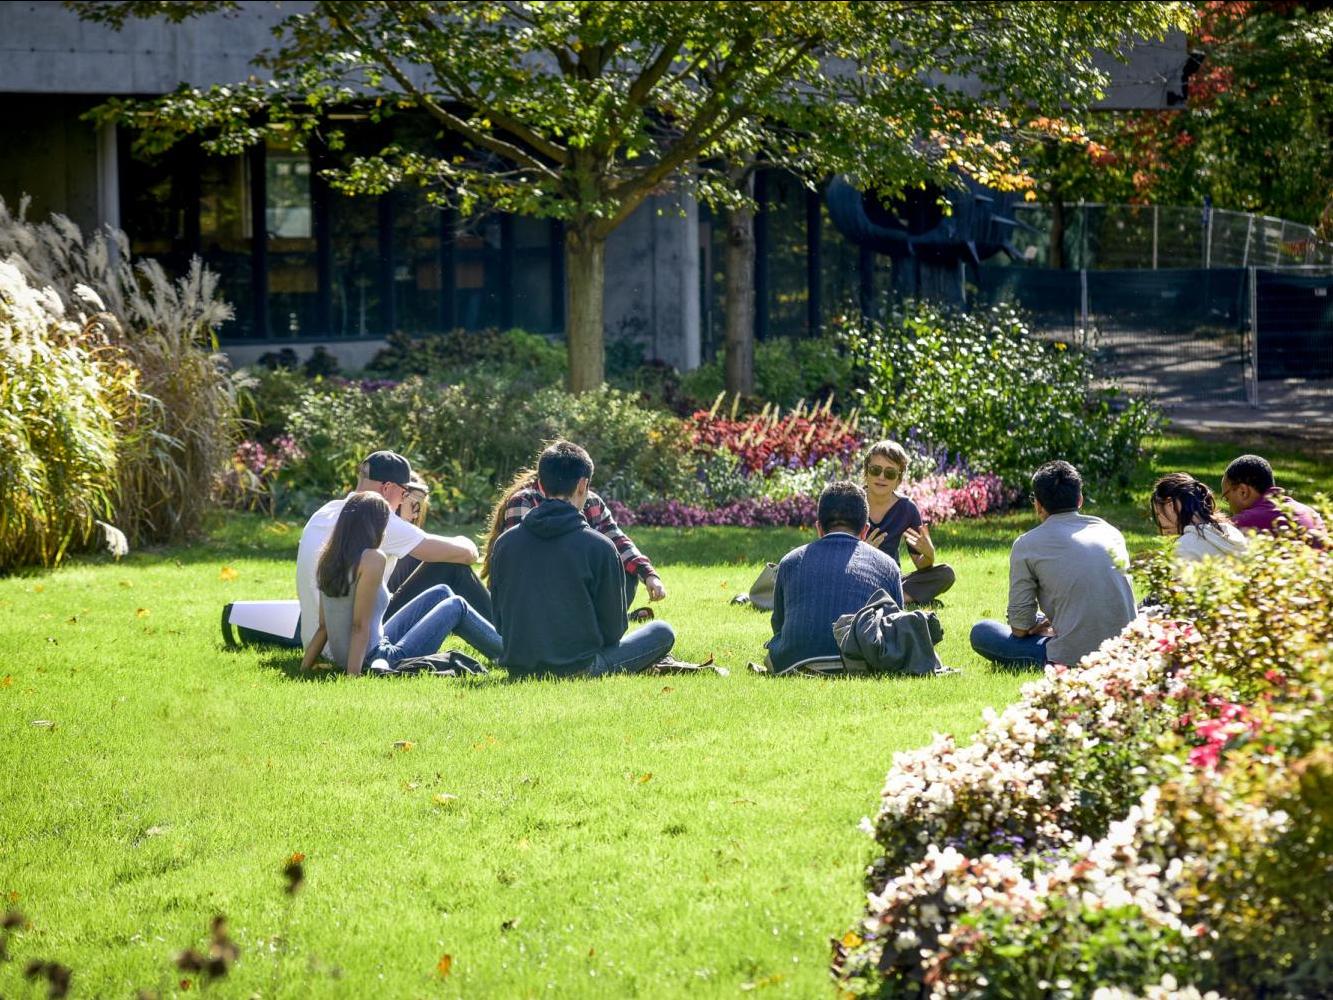 students sitting in a circle on the grass